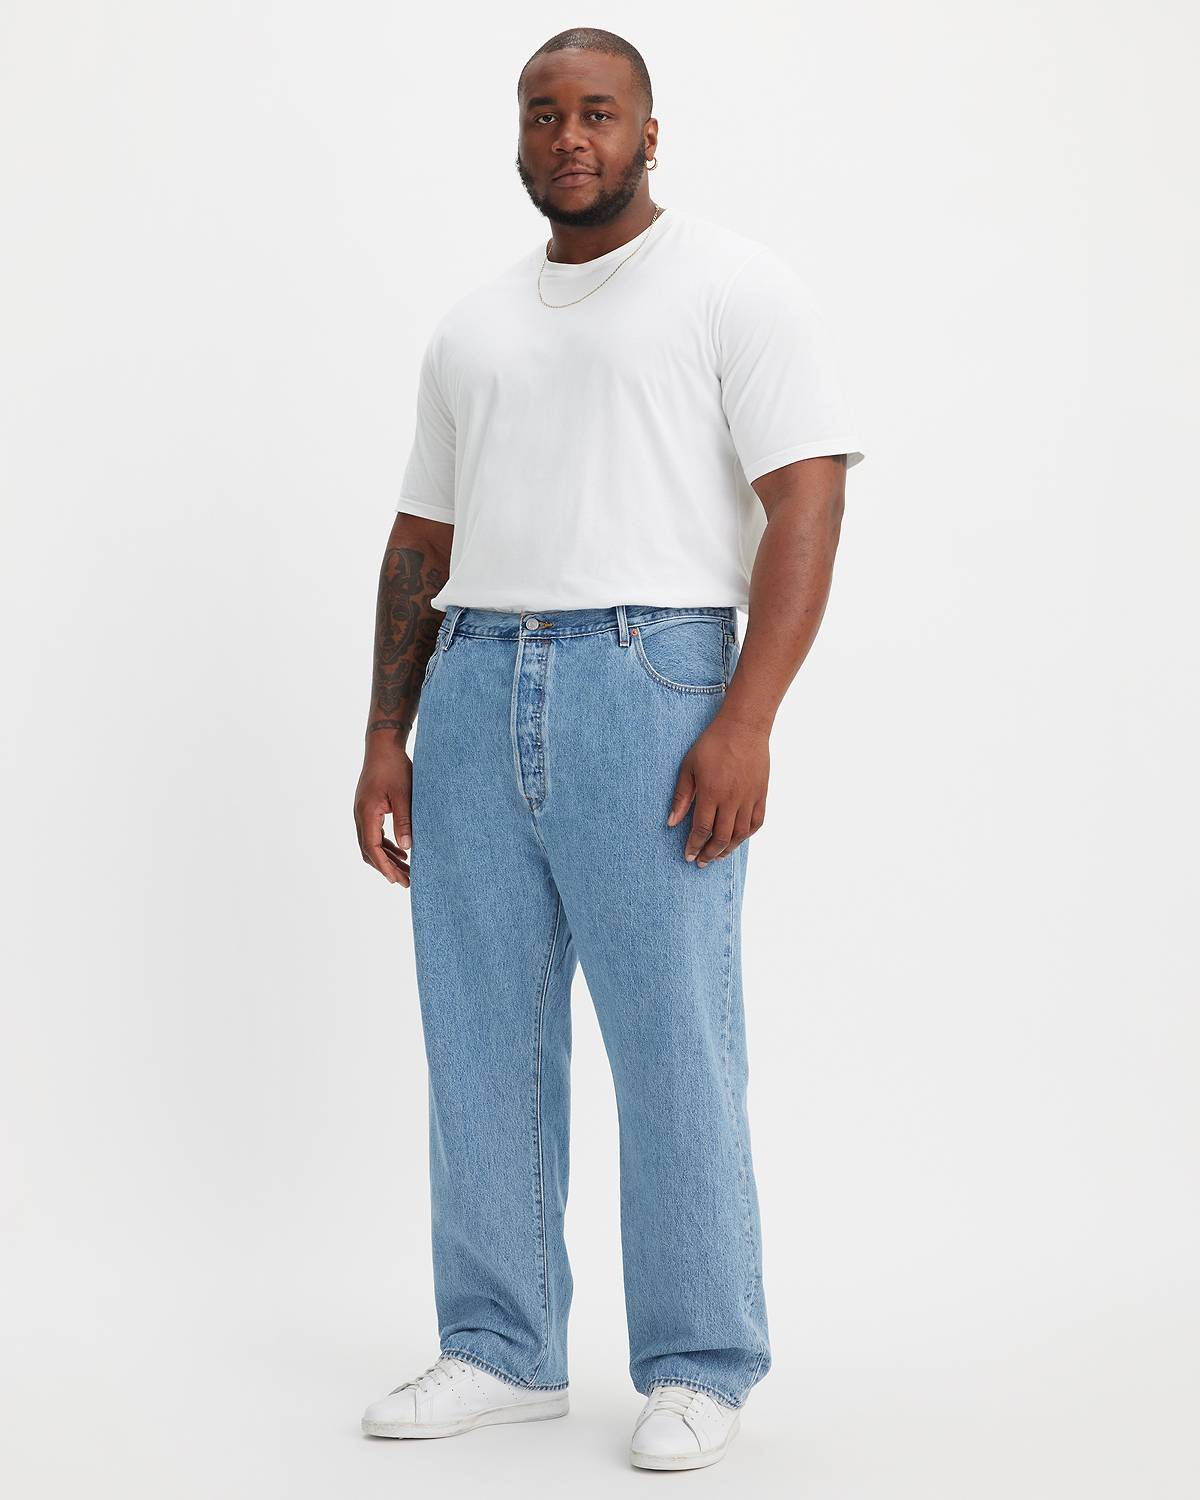 Big & tall male model wearing jean pants and a tee.